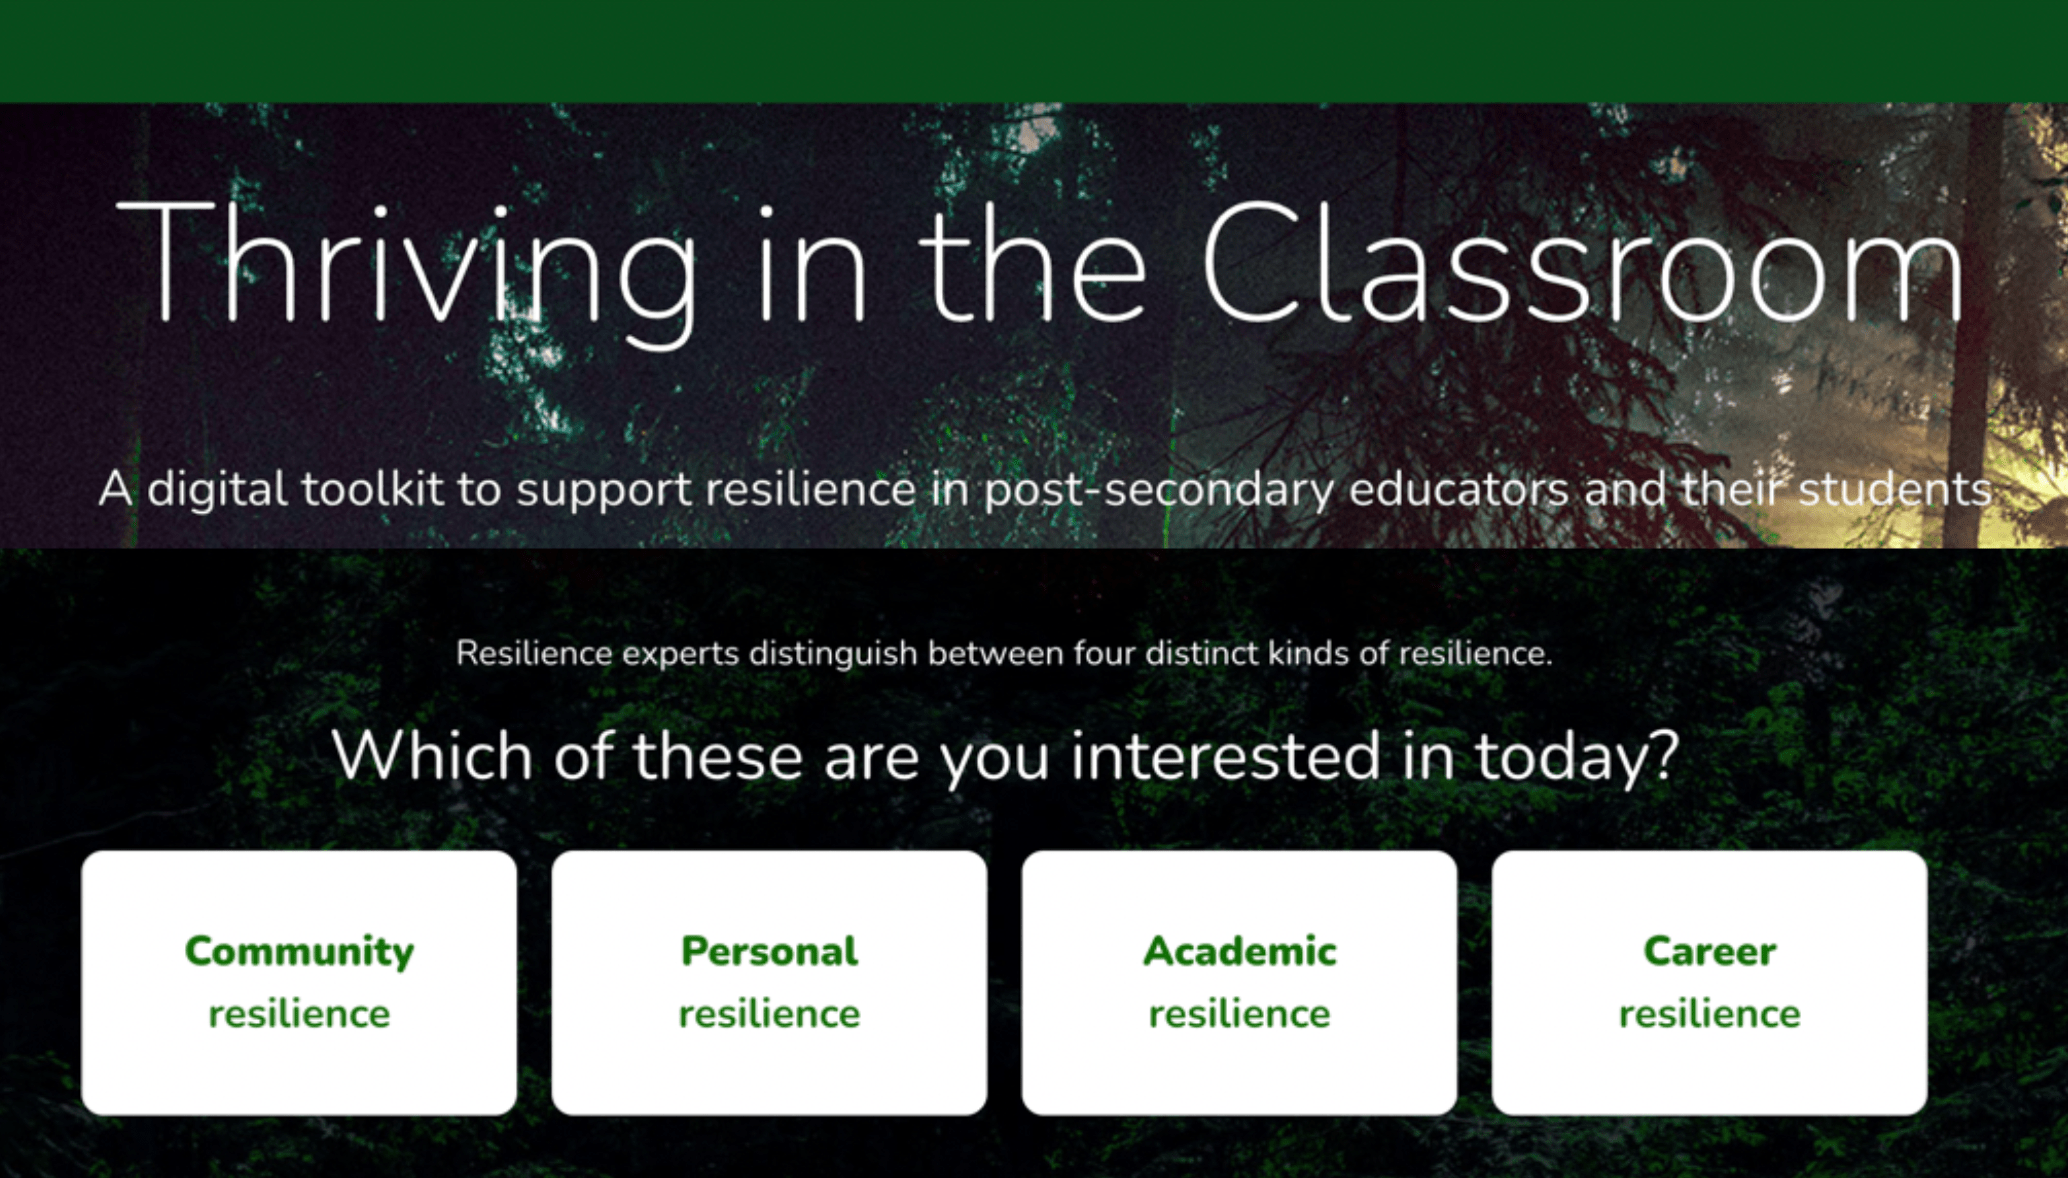 Thriving in the Classroom Toolkit homepage